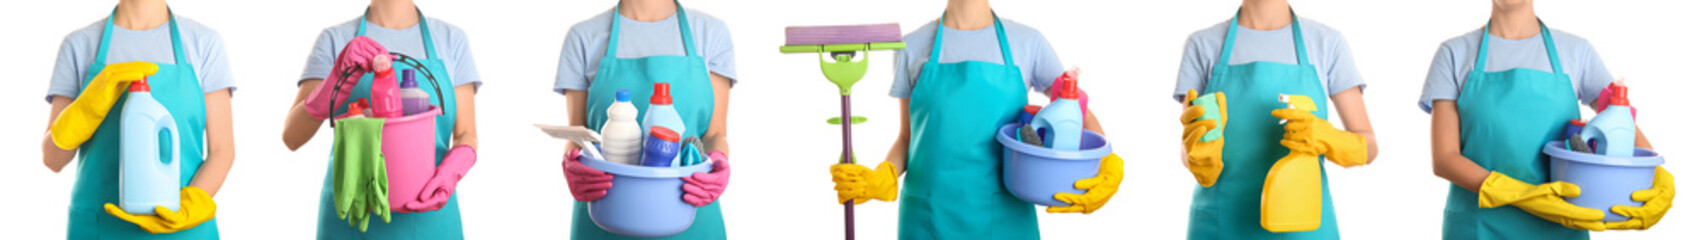 Collage of janitor holding cleaning supplies on white background